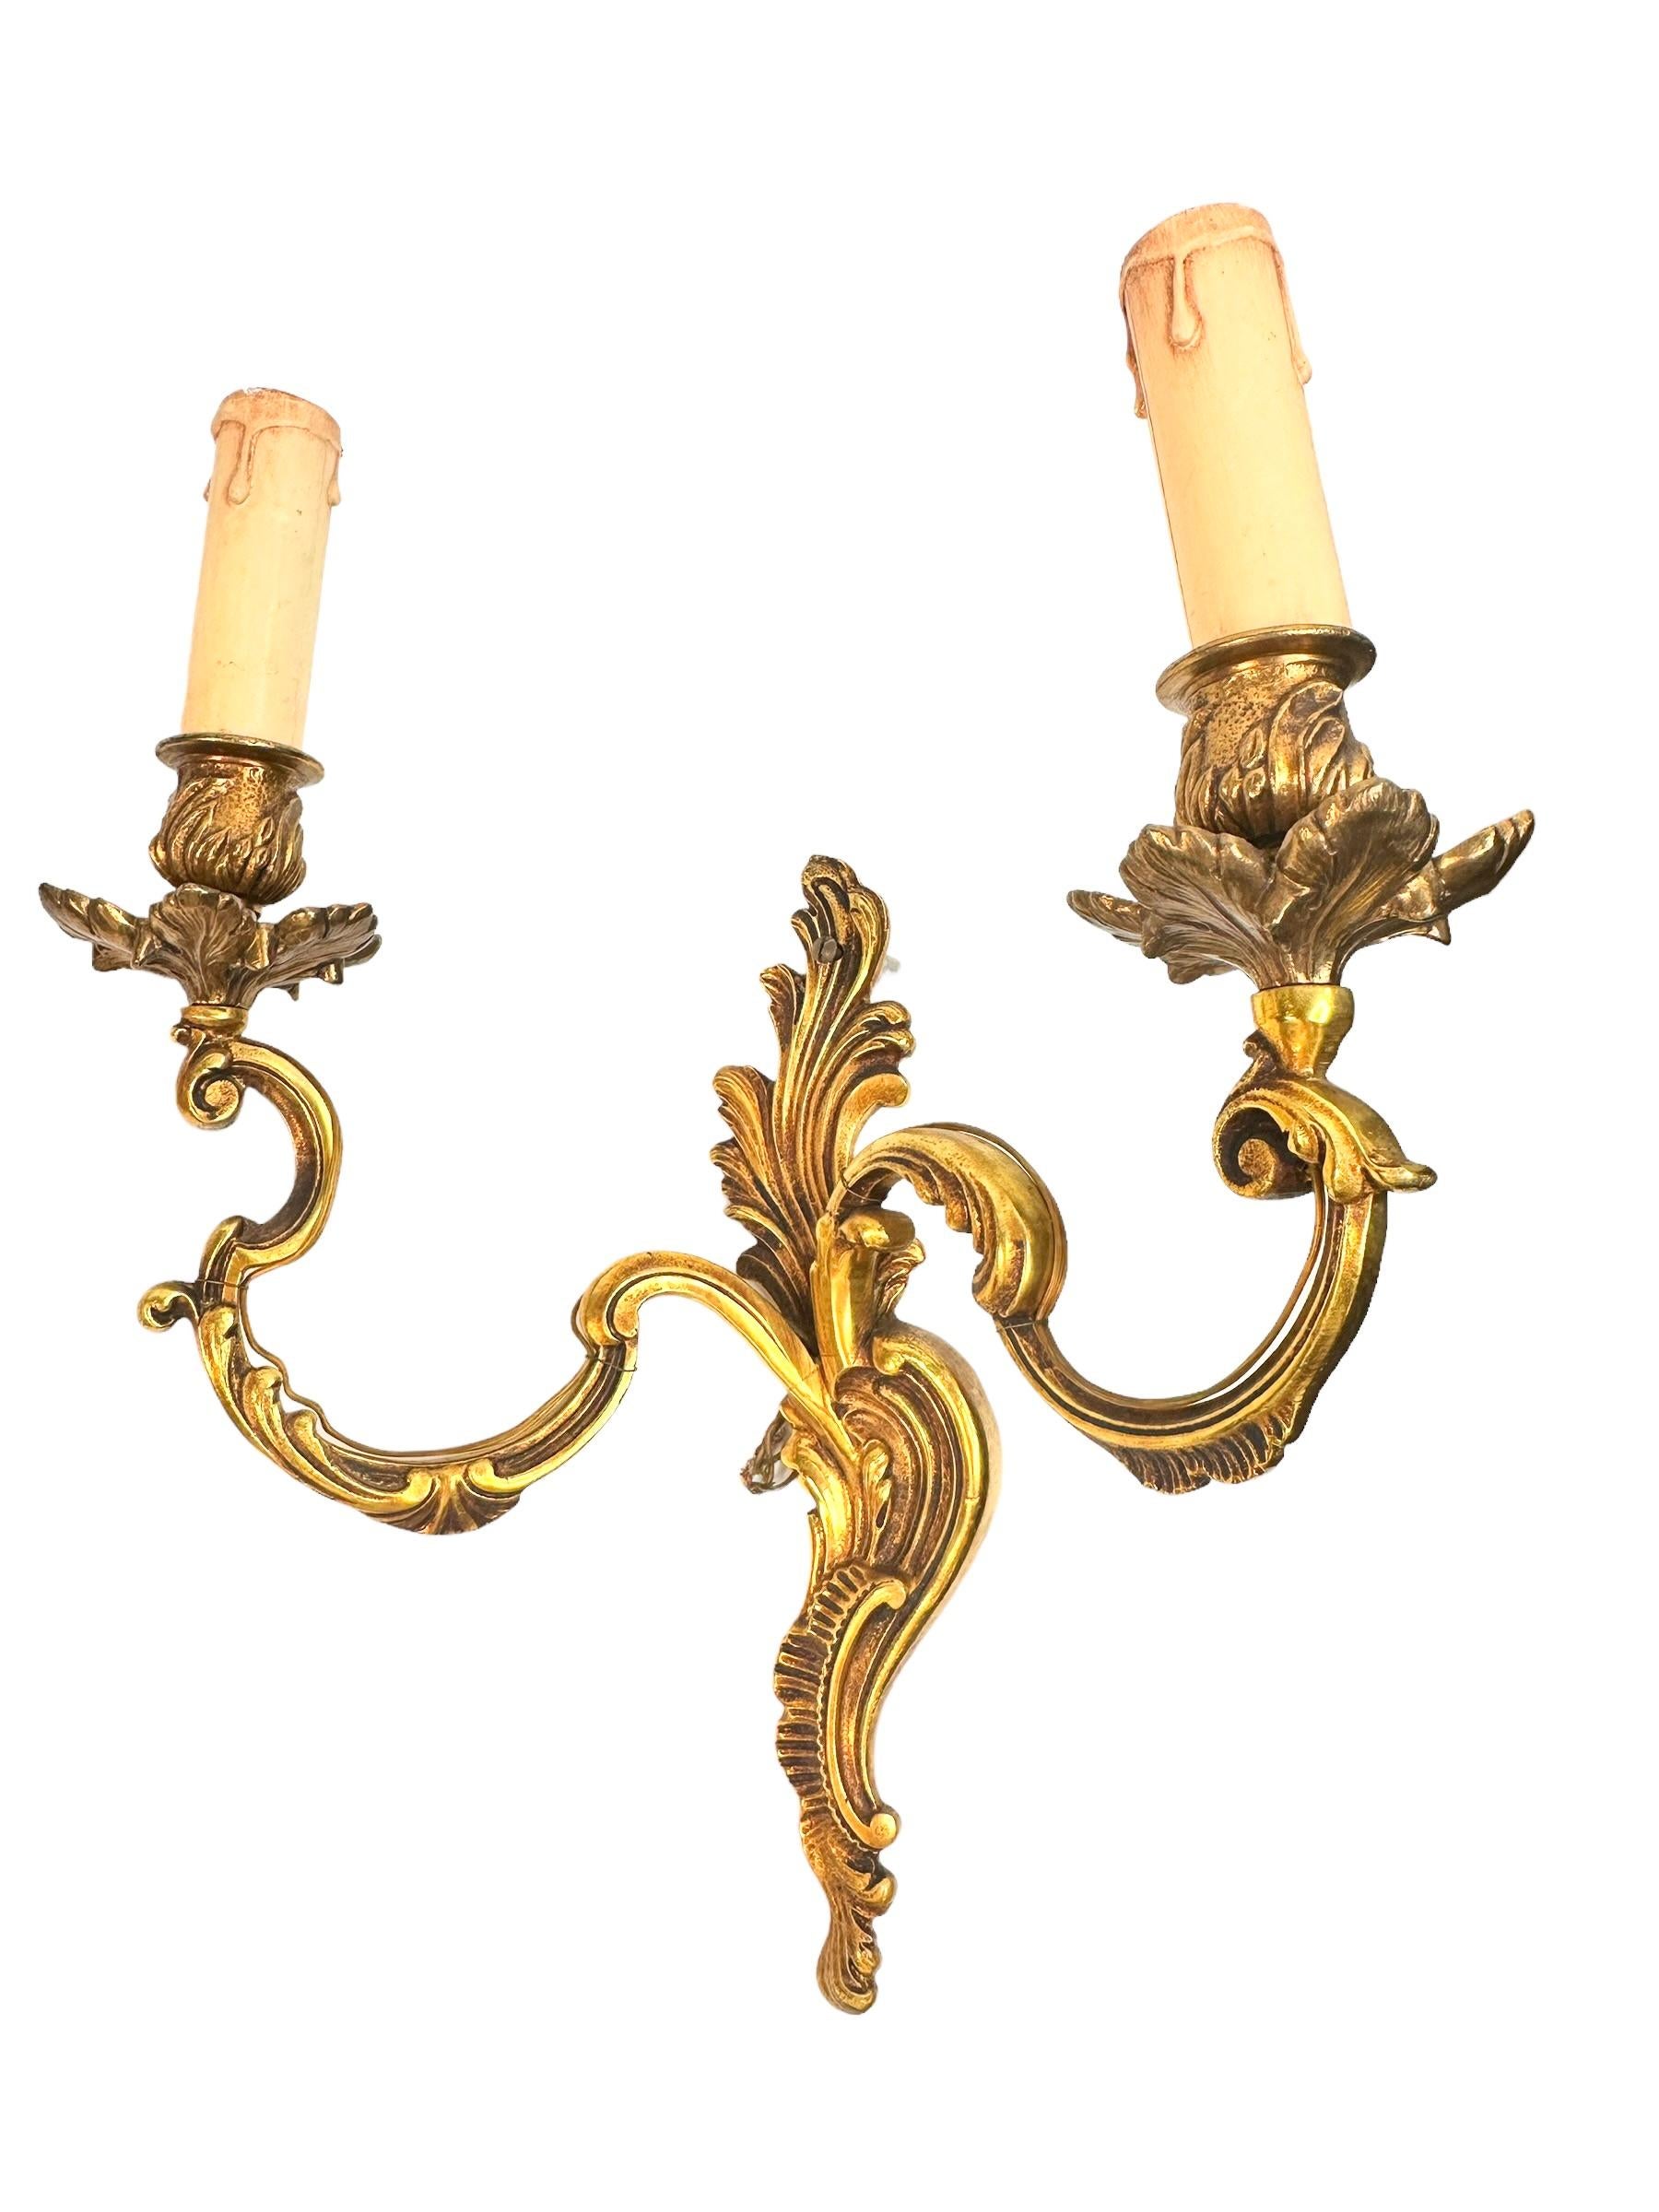 Italian Pair of two Arm Rococo Style Wall Sconces in Bronze Italy, 1950s For Sale